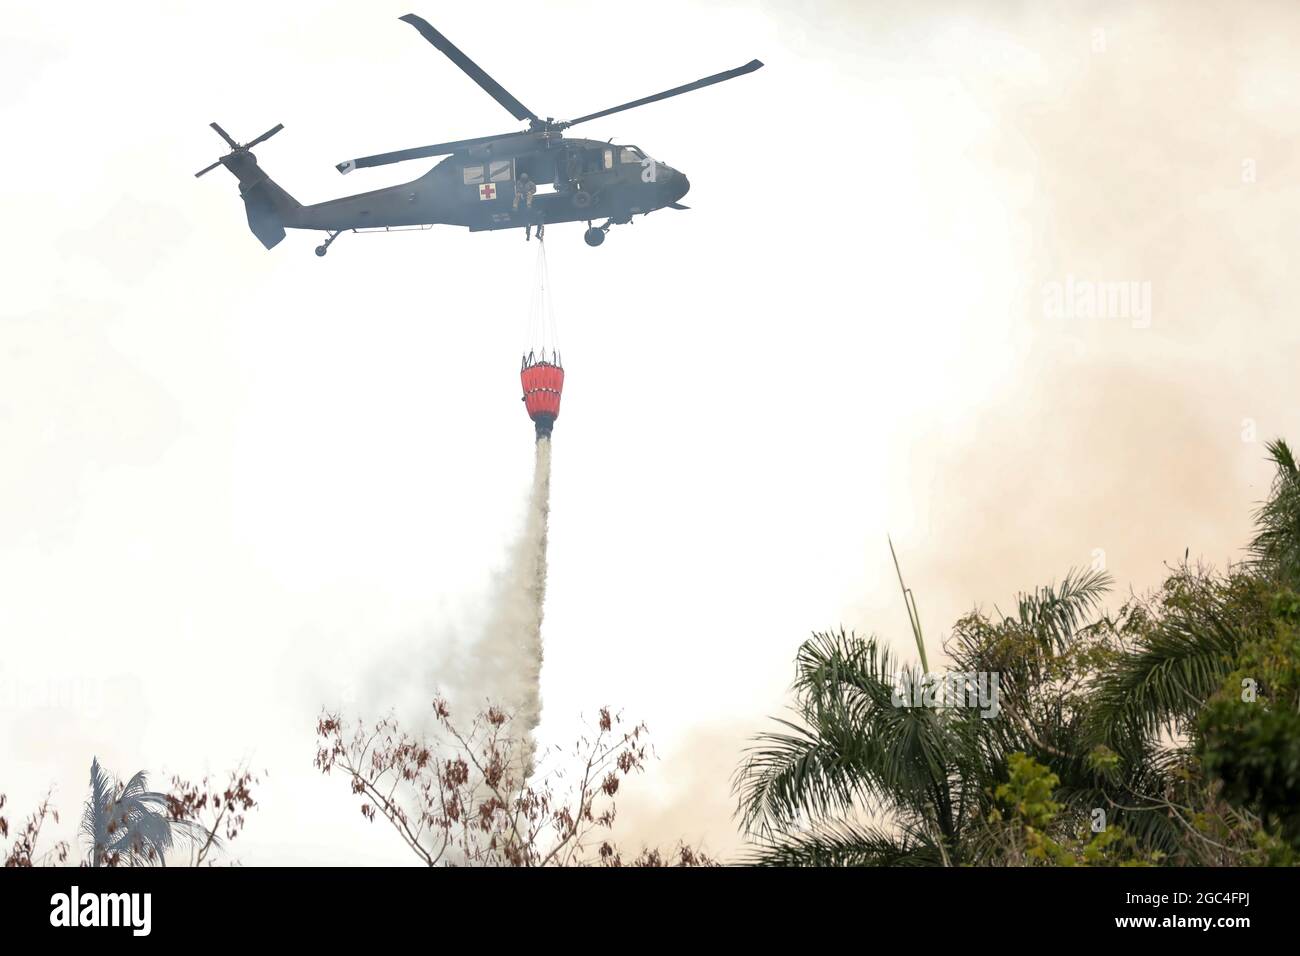 A UH-60 Black Hawk helicopter of Army Aviation of the Puerto A UH-60 Black Hawk helicopter of Army Aviation of the Puerto Army National Guard releases water from a helicopter bucket to fight a fire at Gurabo, Puerto Rico, May 22, 2021. The Governor of Puerto Rico, Pedro Pierluisi, activated the National Guard in support of the Puerto Rico Fire Department to fight fires in Gurabo and Cayey to protect residents' health, well-being, and property. (U.S. Army National Guard photo by Staff Sgt. Marimar Rivera Medina) Stock Photo